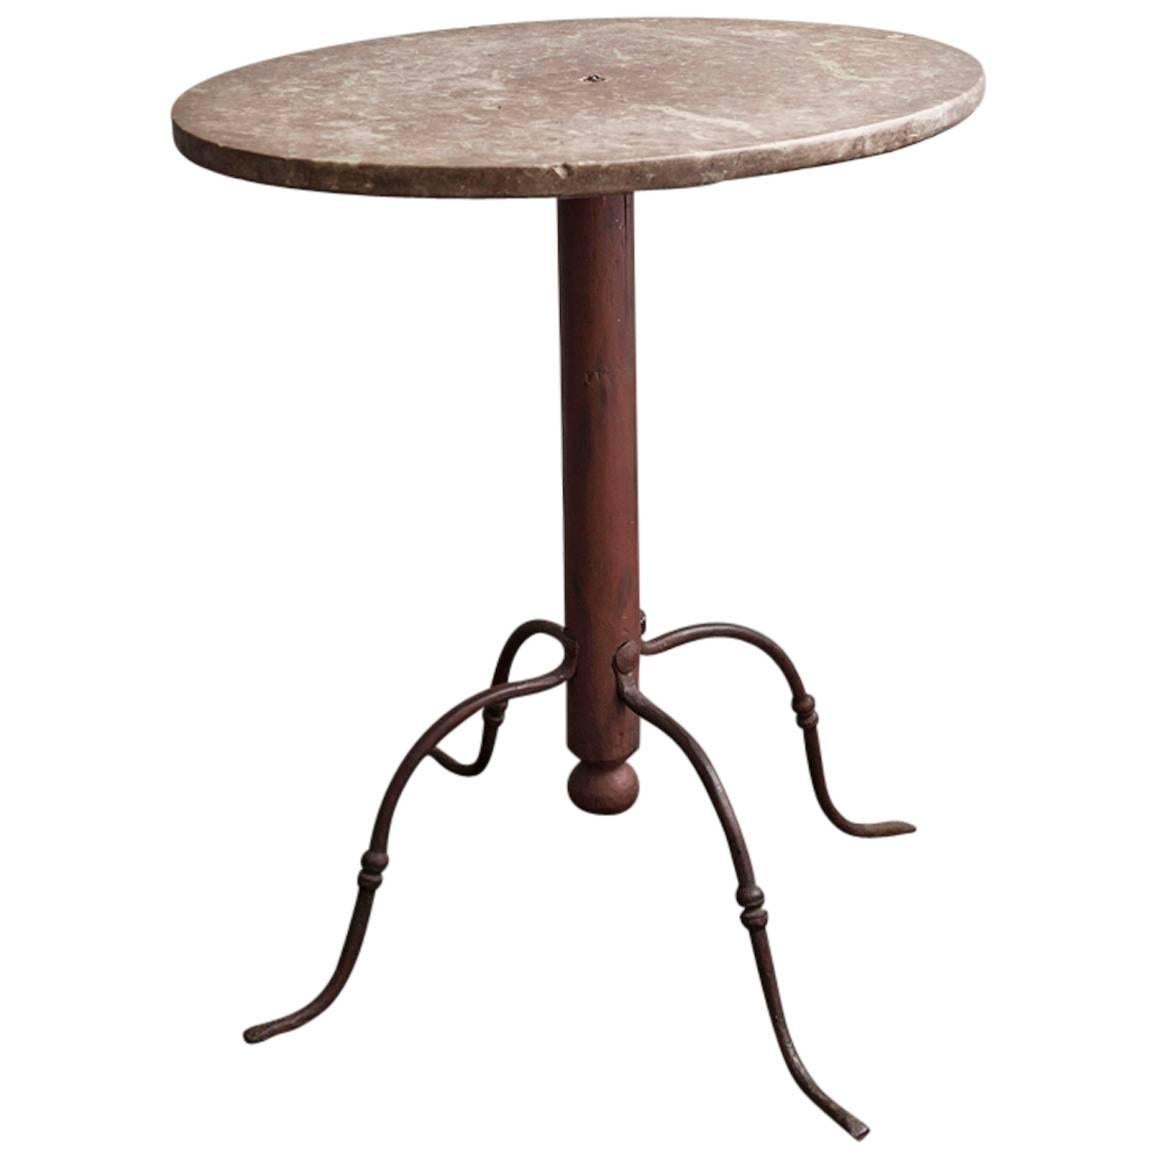 Exquisite Swedish Side Table from the 18th Century